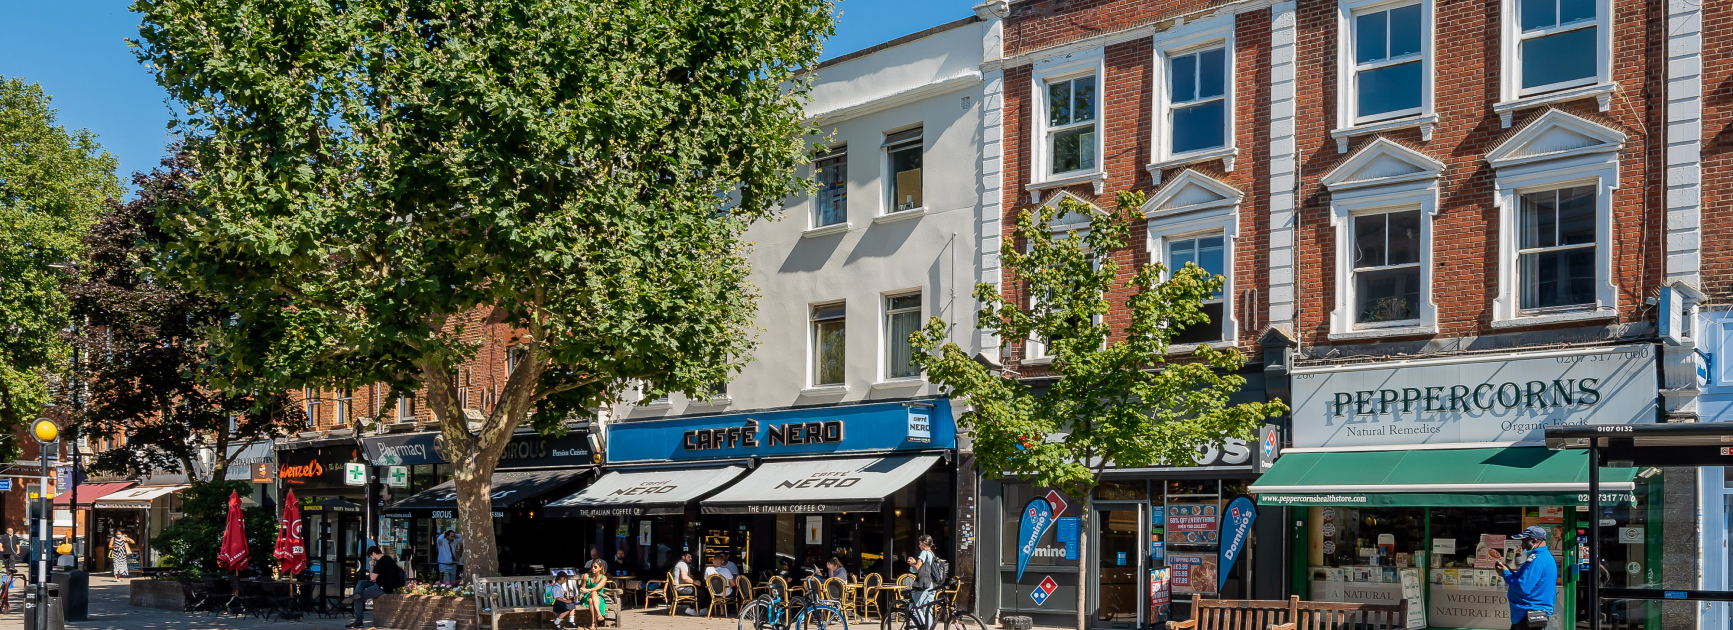 Vita Properties offers estate services throughout Hampstead, West Hampstead, South Hampstead, Belsize Park, NW3, and London Primrose Hill.